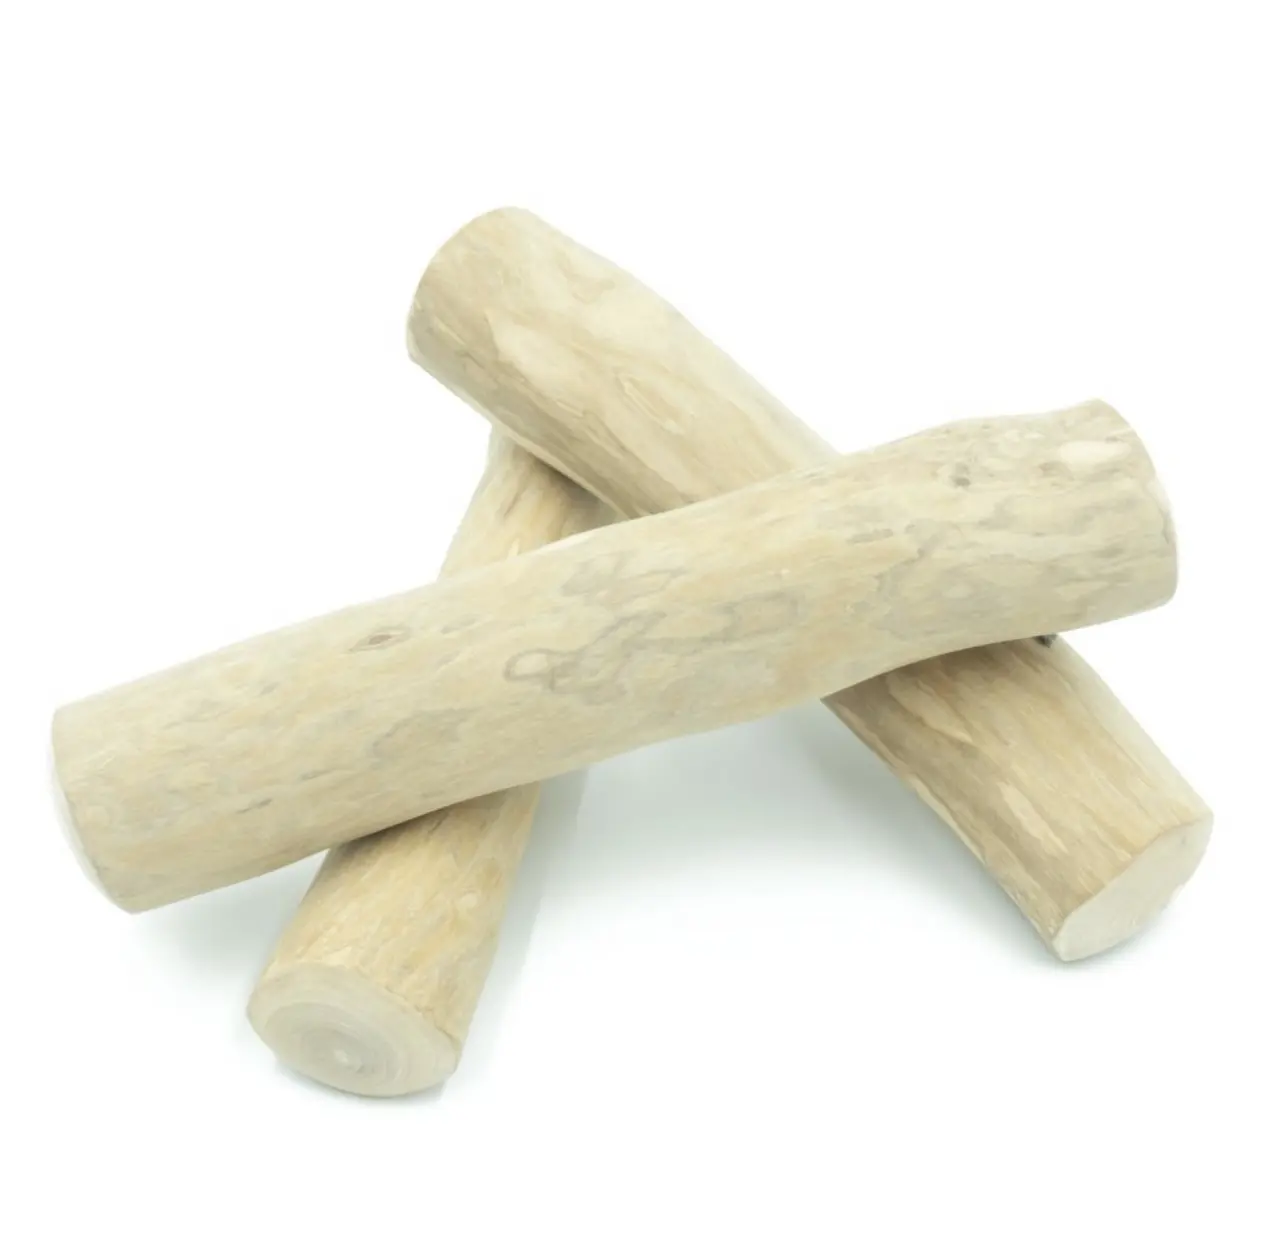 COFFEE WOOD CHEW TOYS - SAFE FOR YOUR PET - 100% COFFEE WOOD VIET NAM